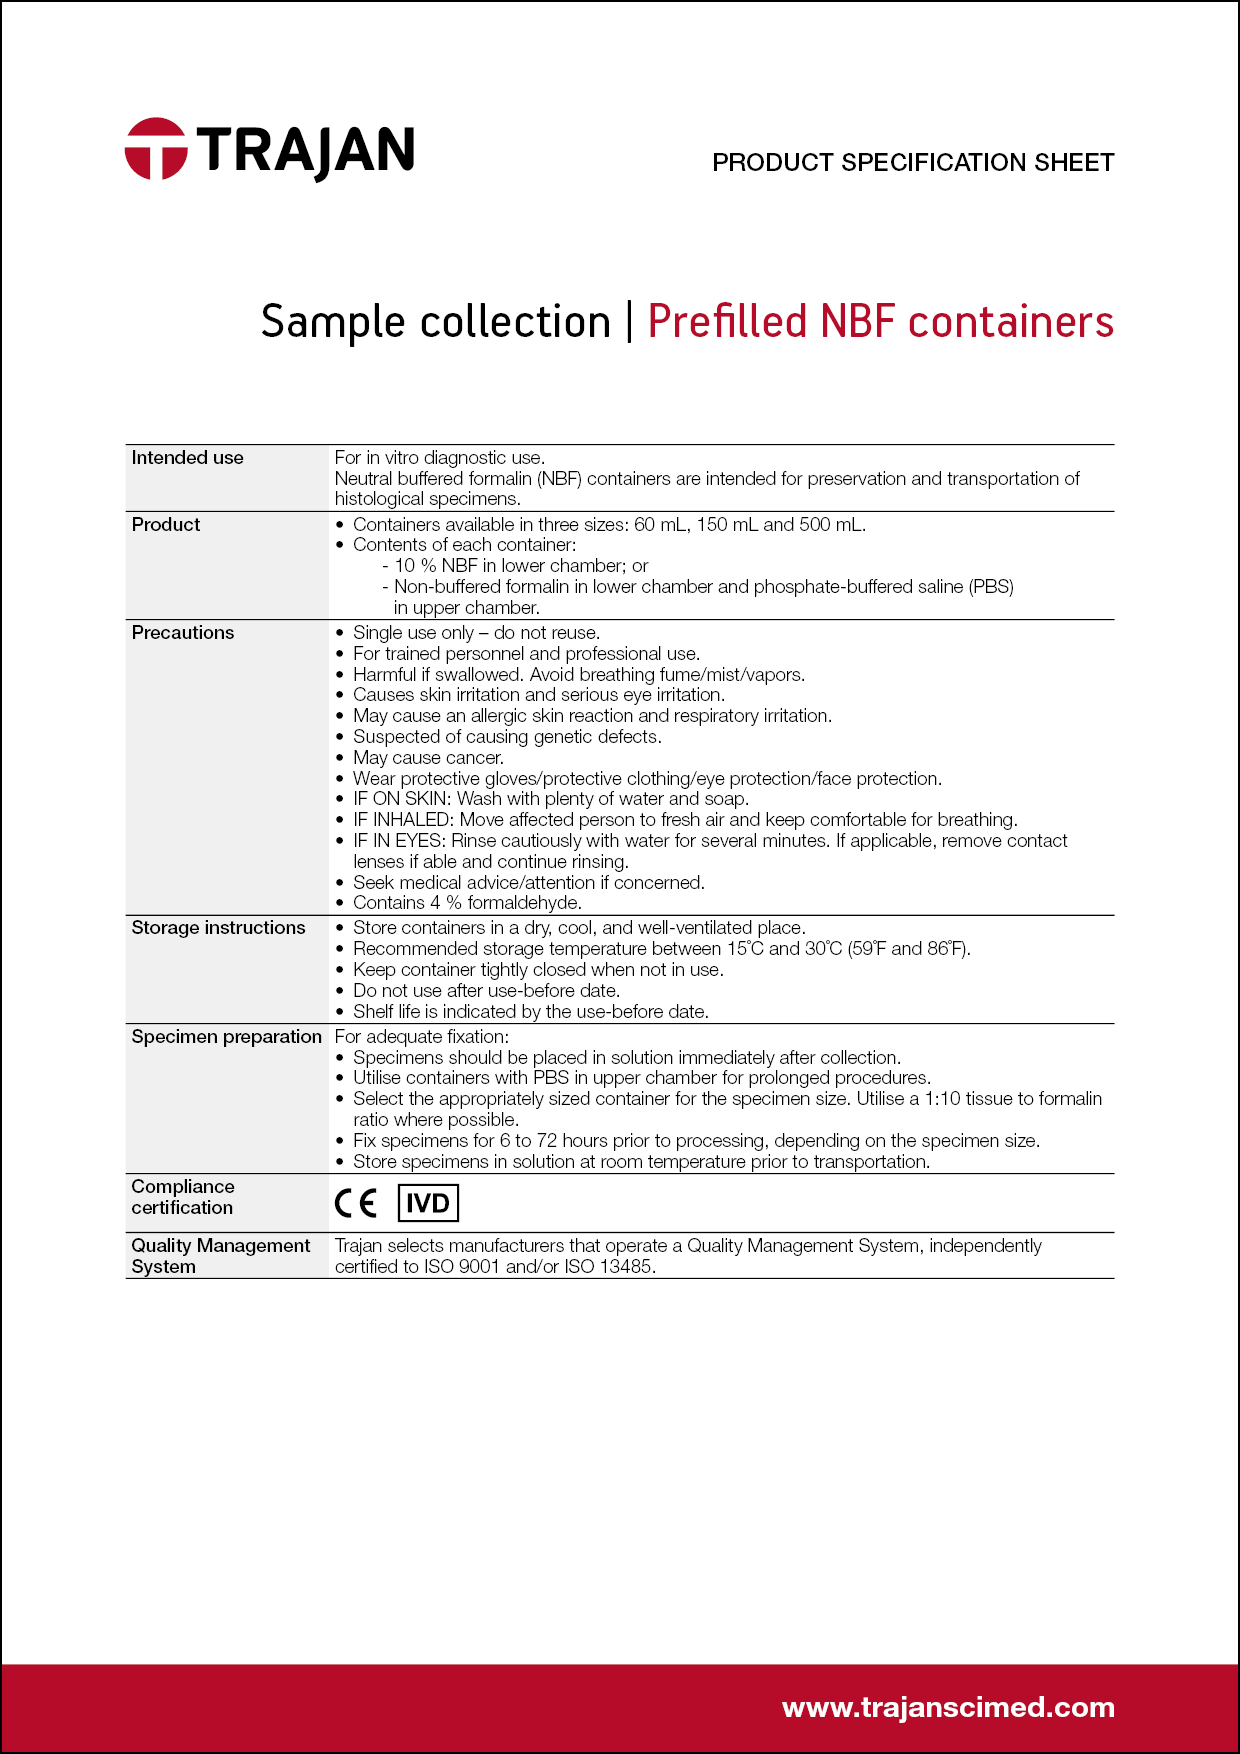 Product Specification Sheet - Prefilled NBF containers